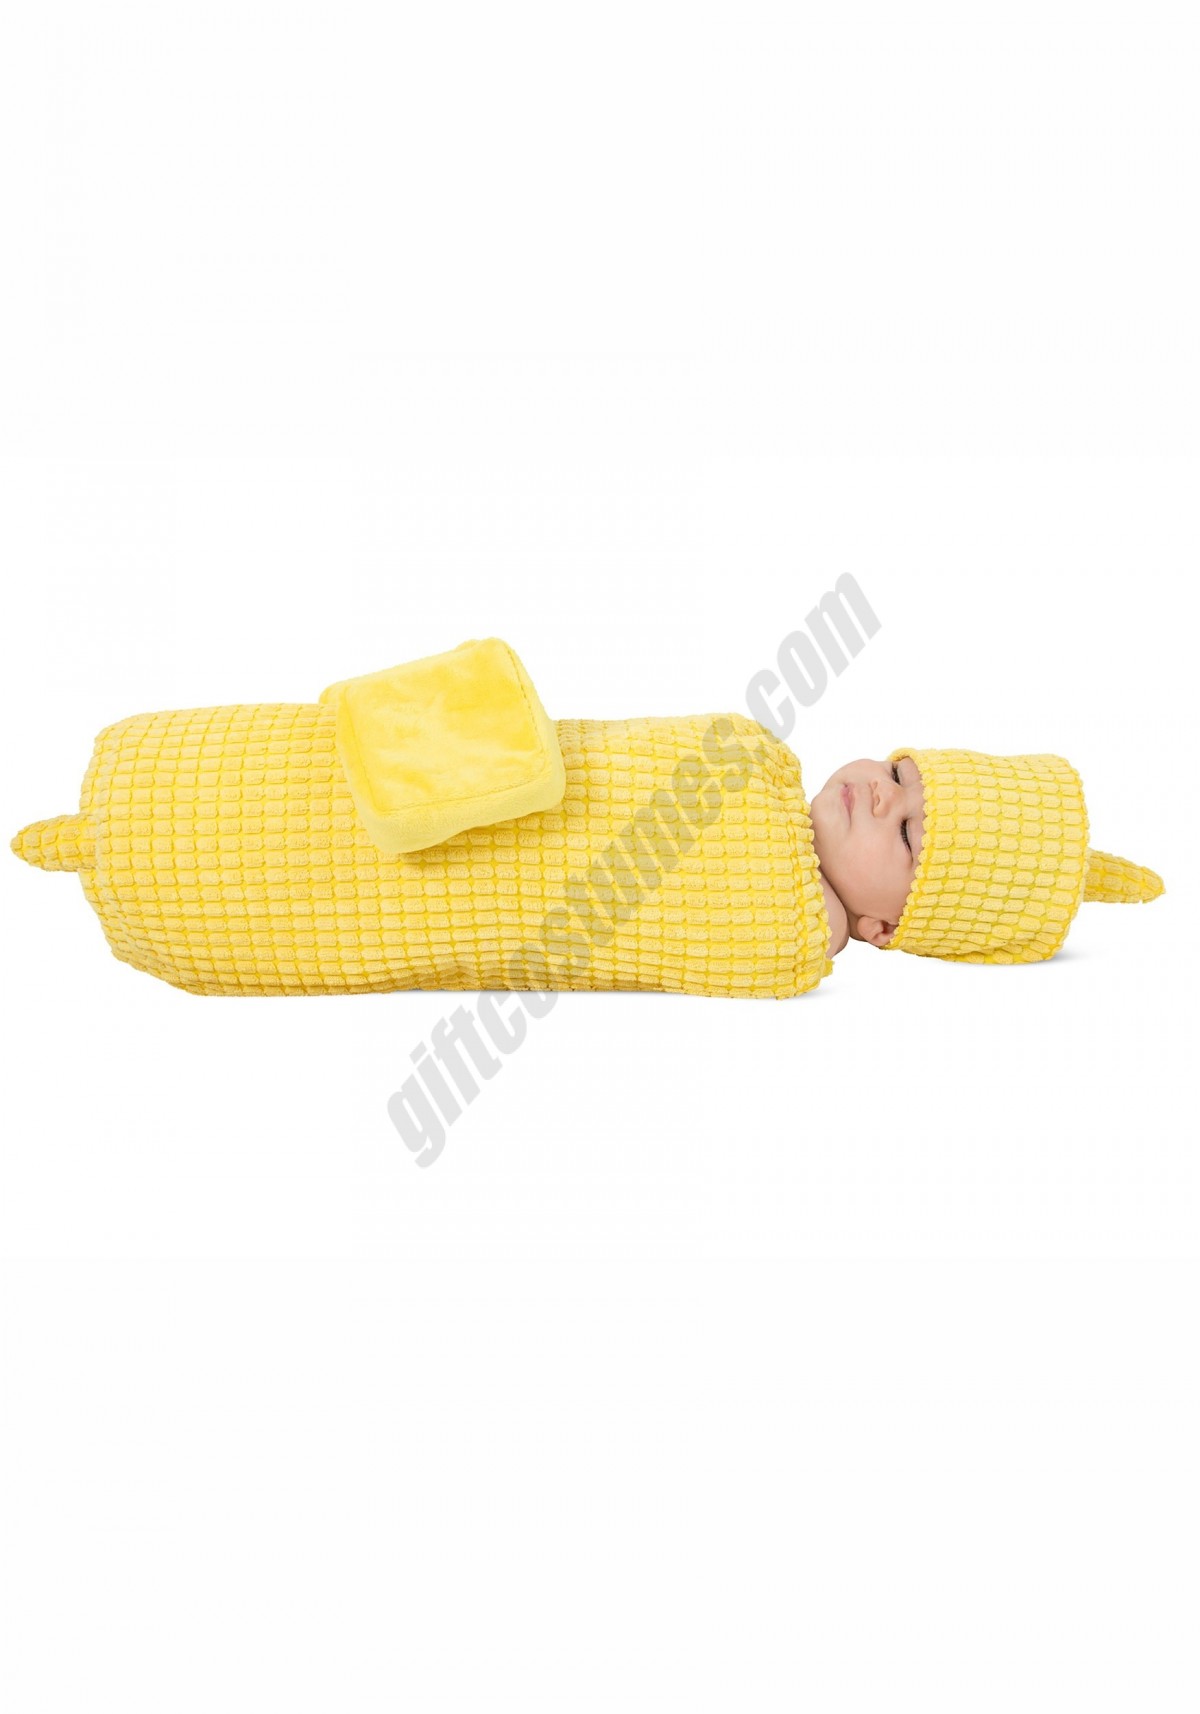 Infant's Corn on the Cob Costume Promotions - -0